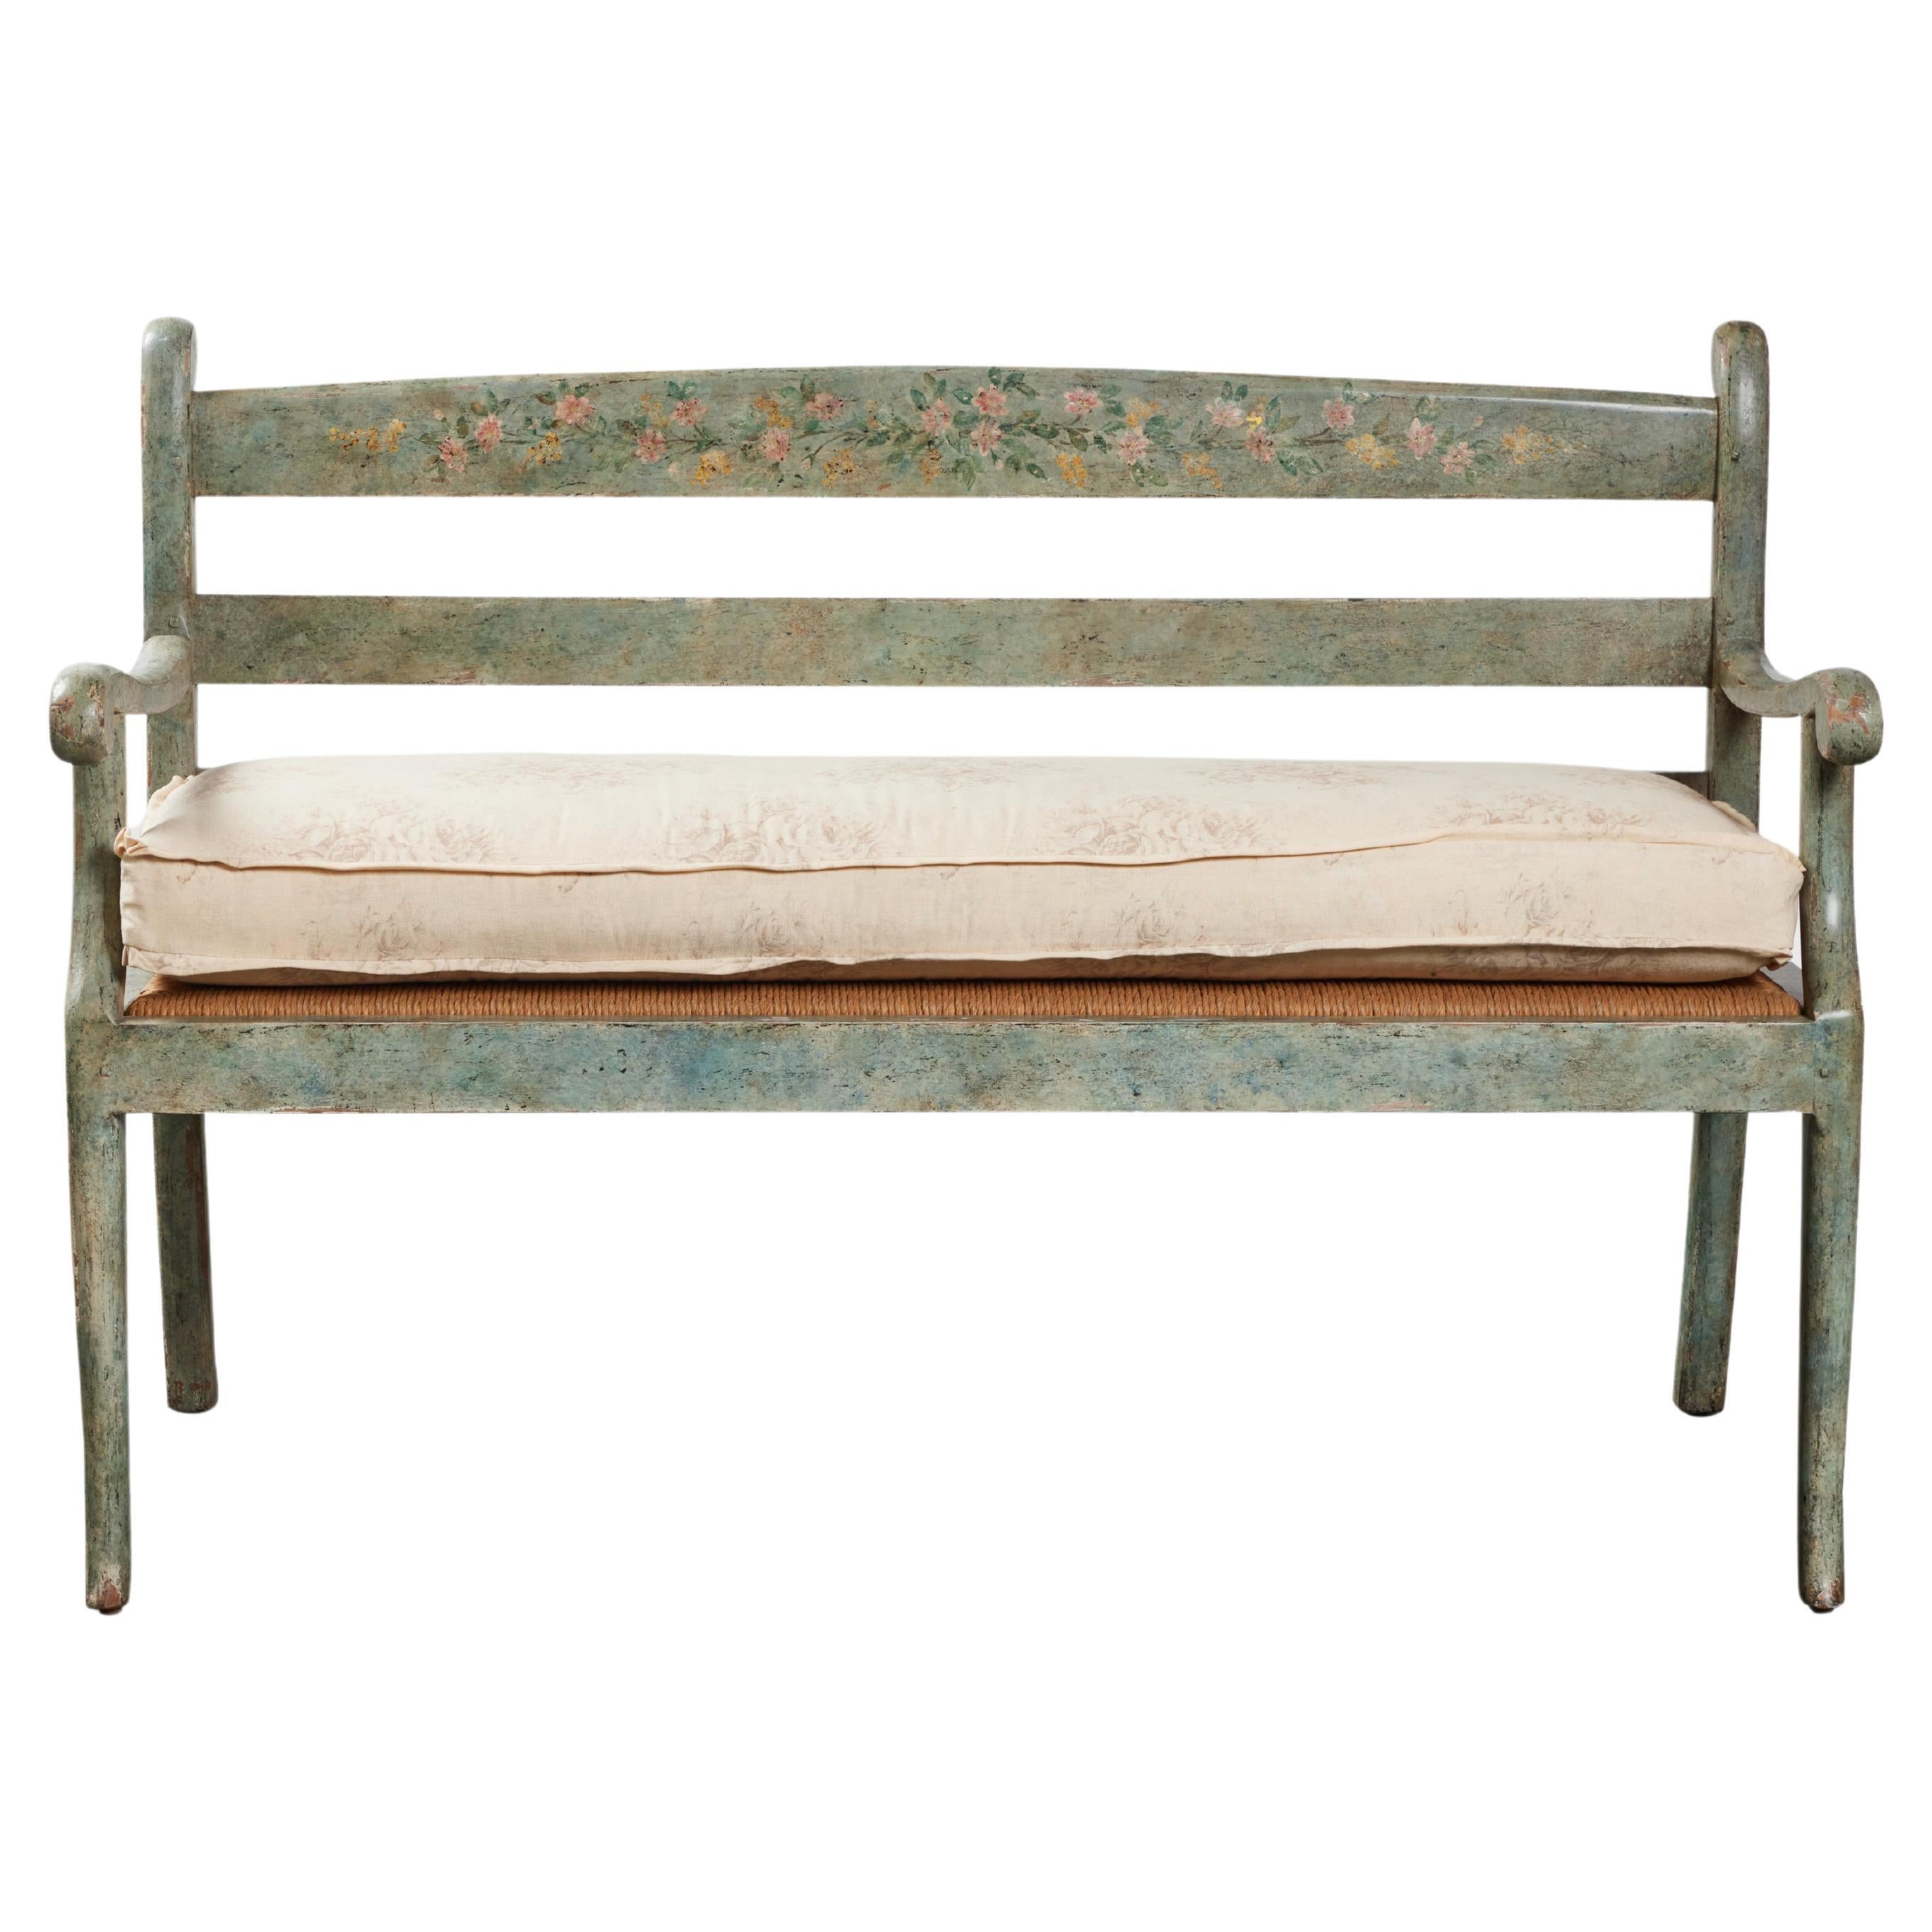 Painted French Provincial Style wooden bench with wicker seat and custom upholstered cushion. Original green paint with floral design on the backrest. Made by John Hall Designs, Los Angeles, 1990. 

Additional Dimensions: 
Arm Height 28